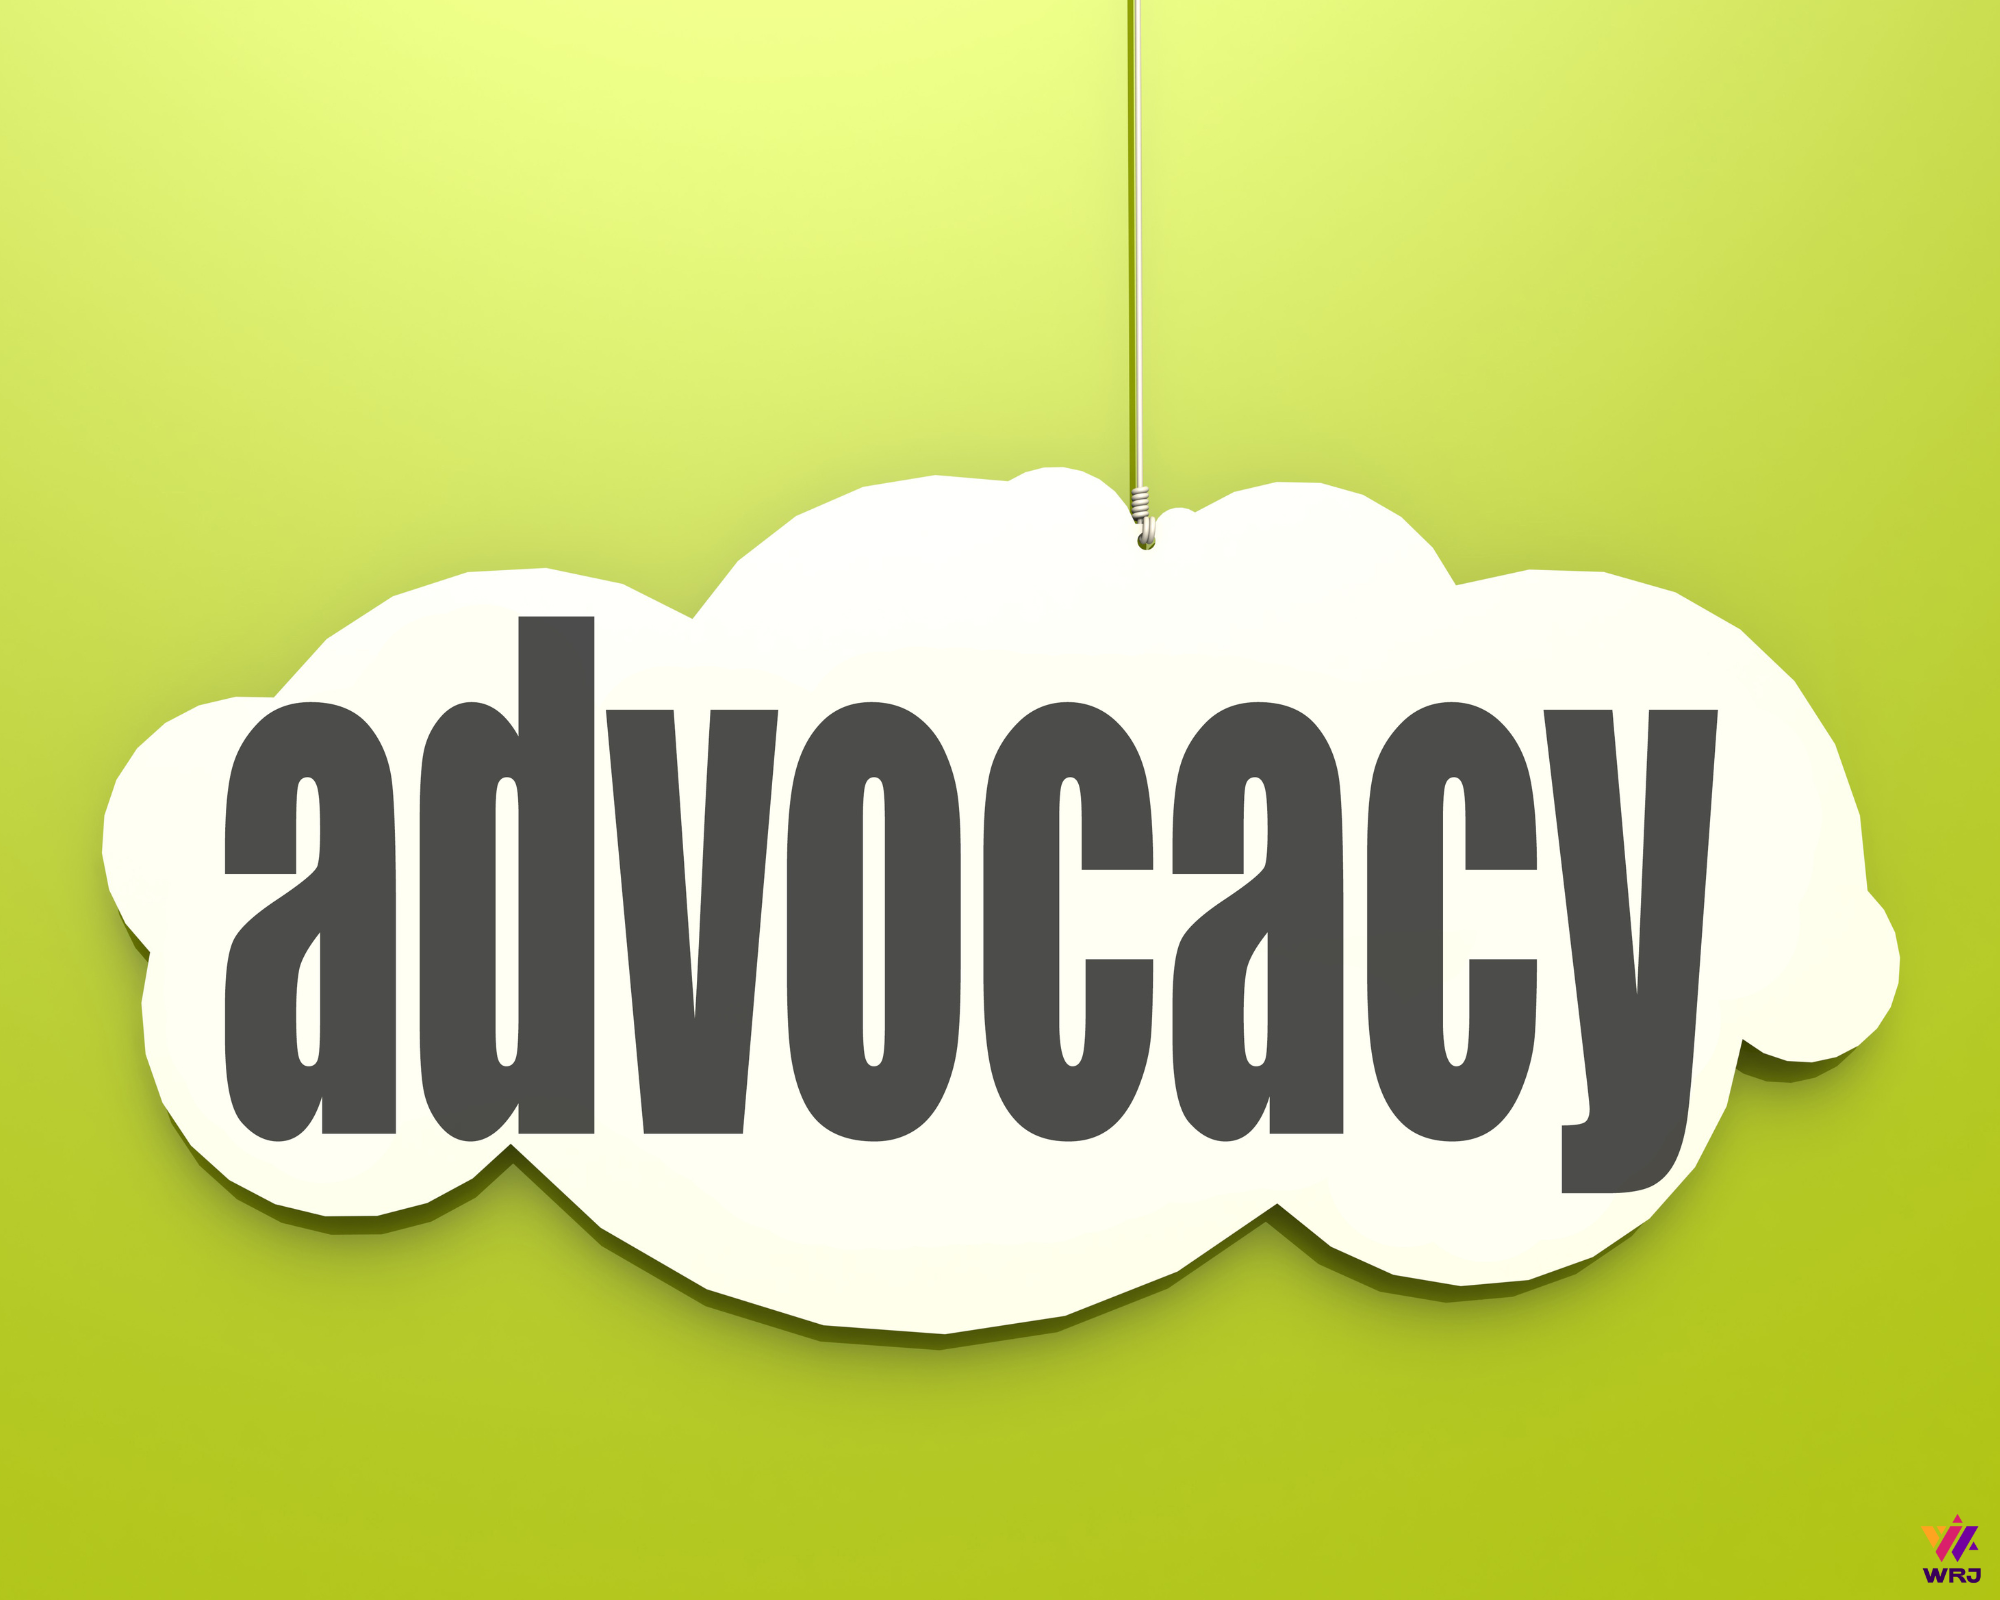 Advocacy in a white cloud against a lime green background. 